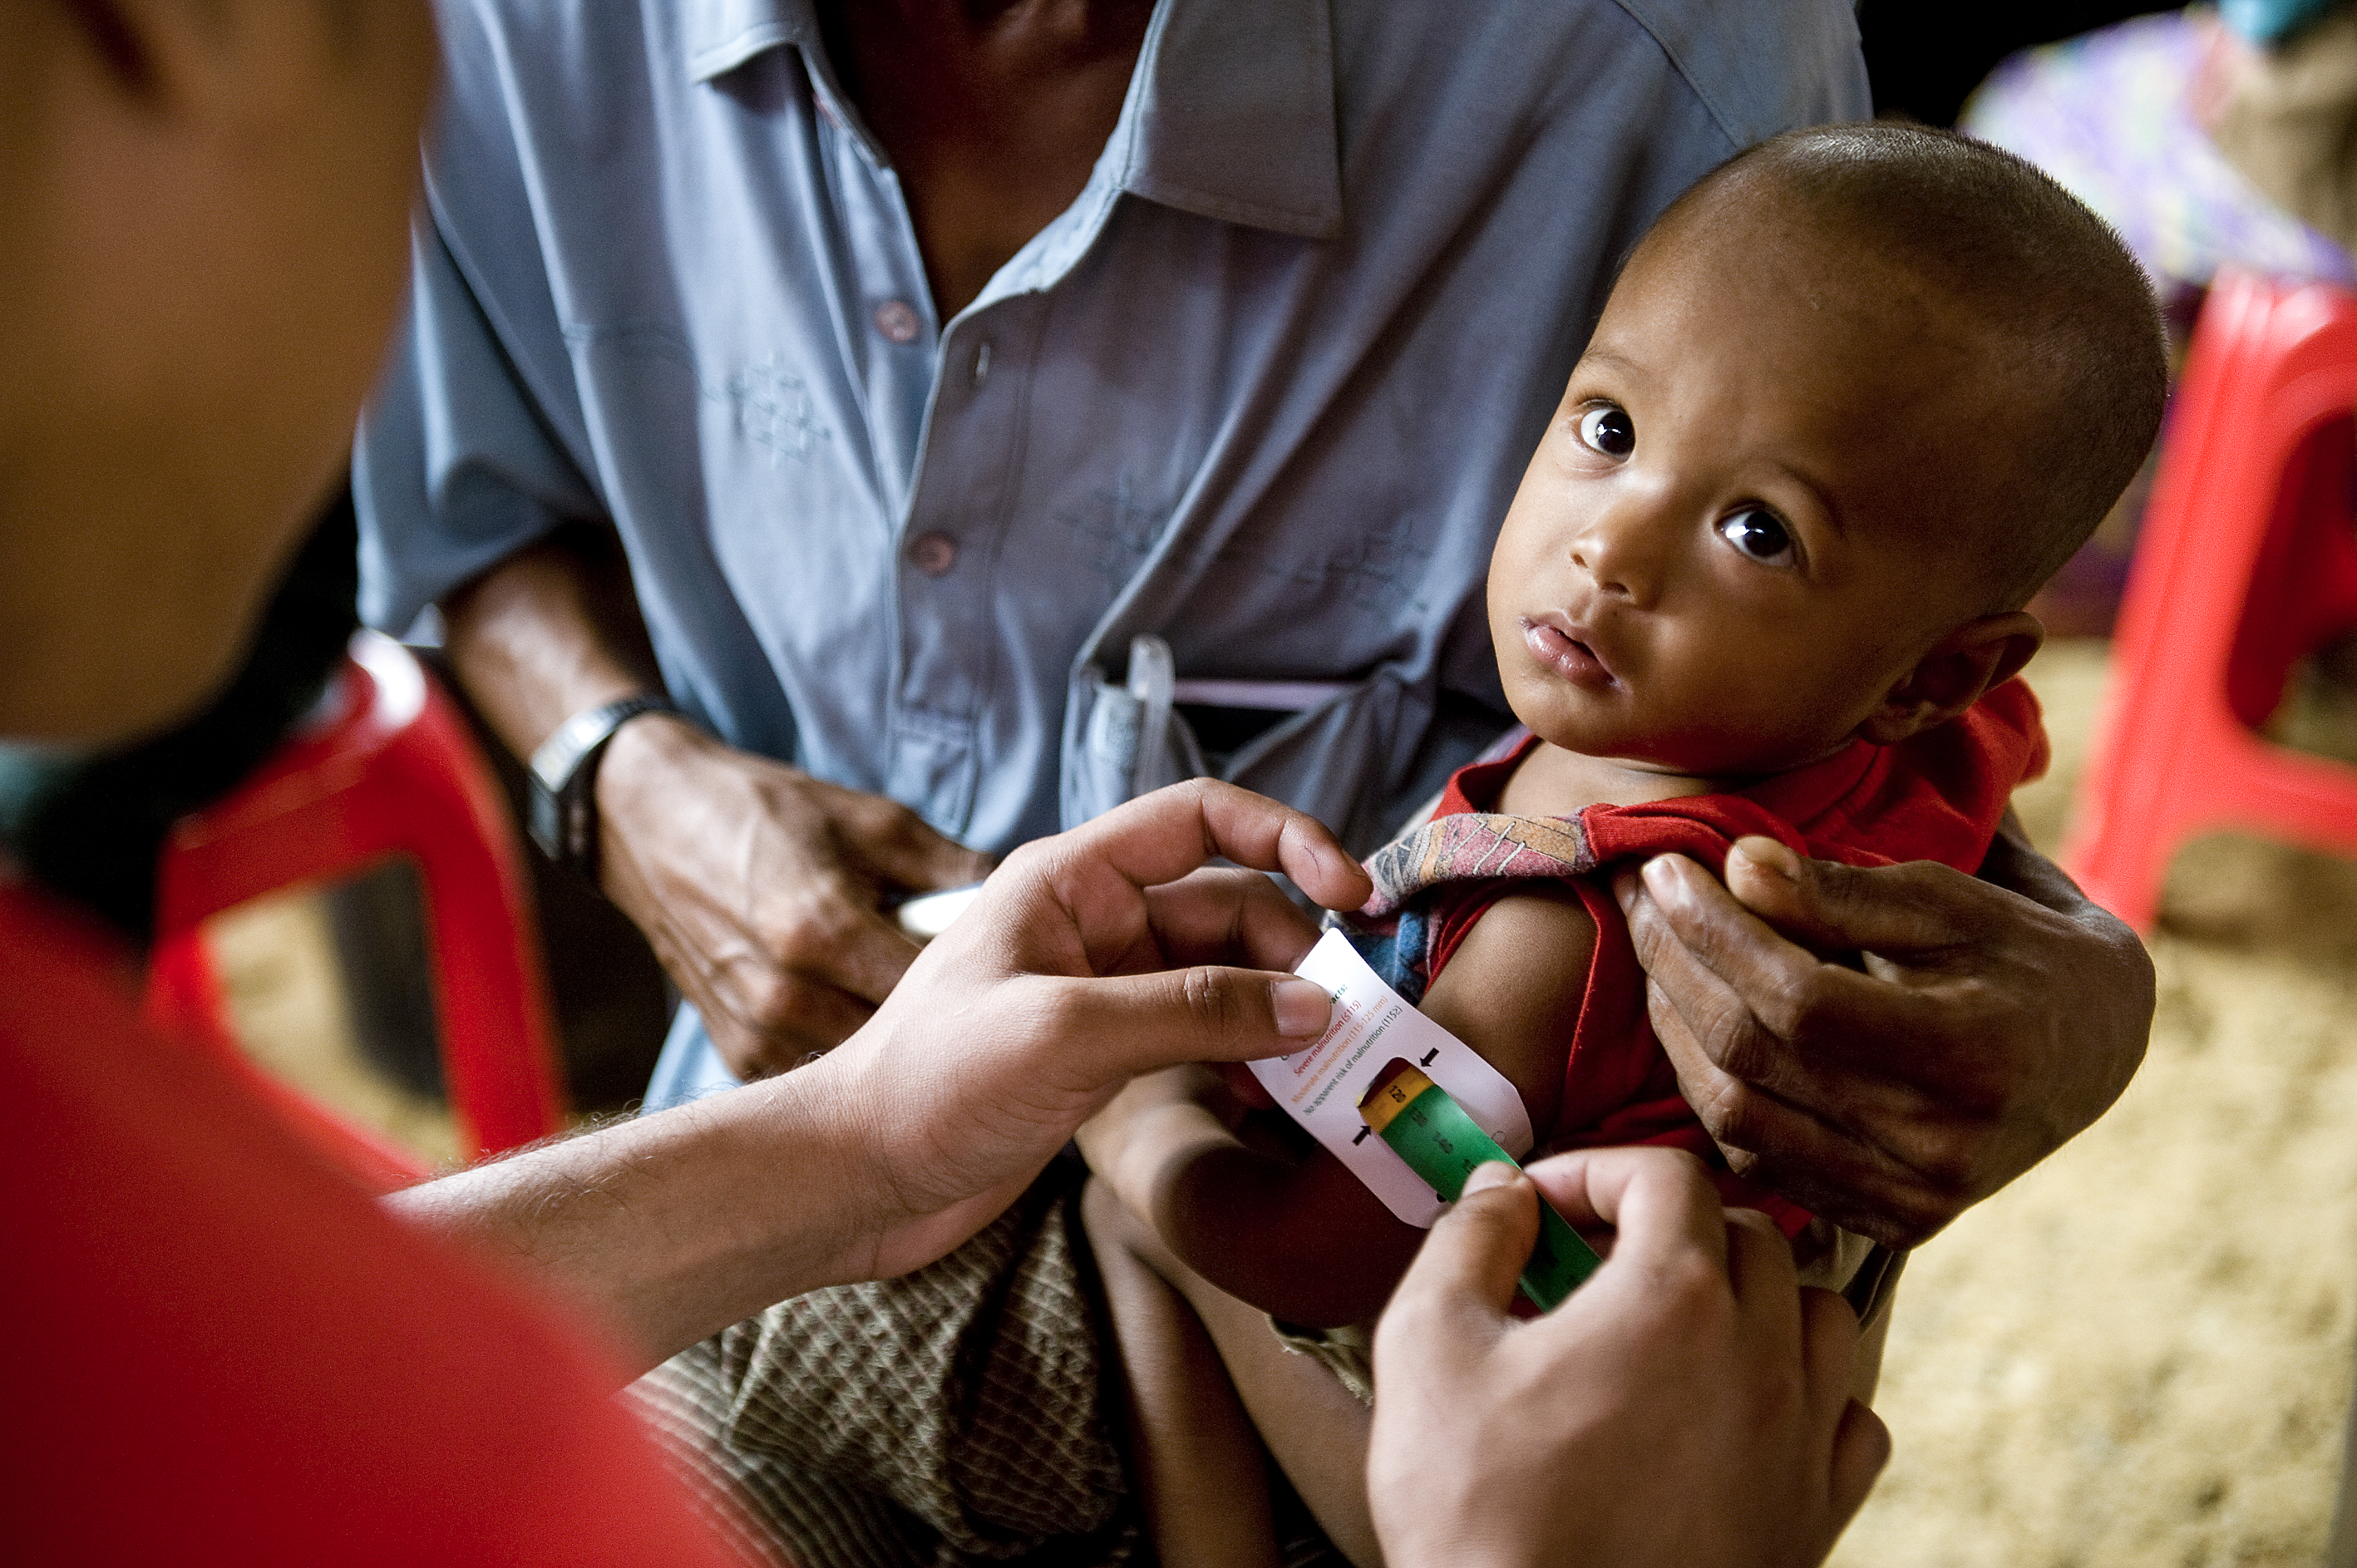 A child is tested for malnutrition with a MUAC band